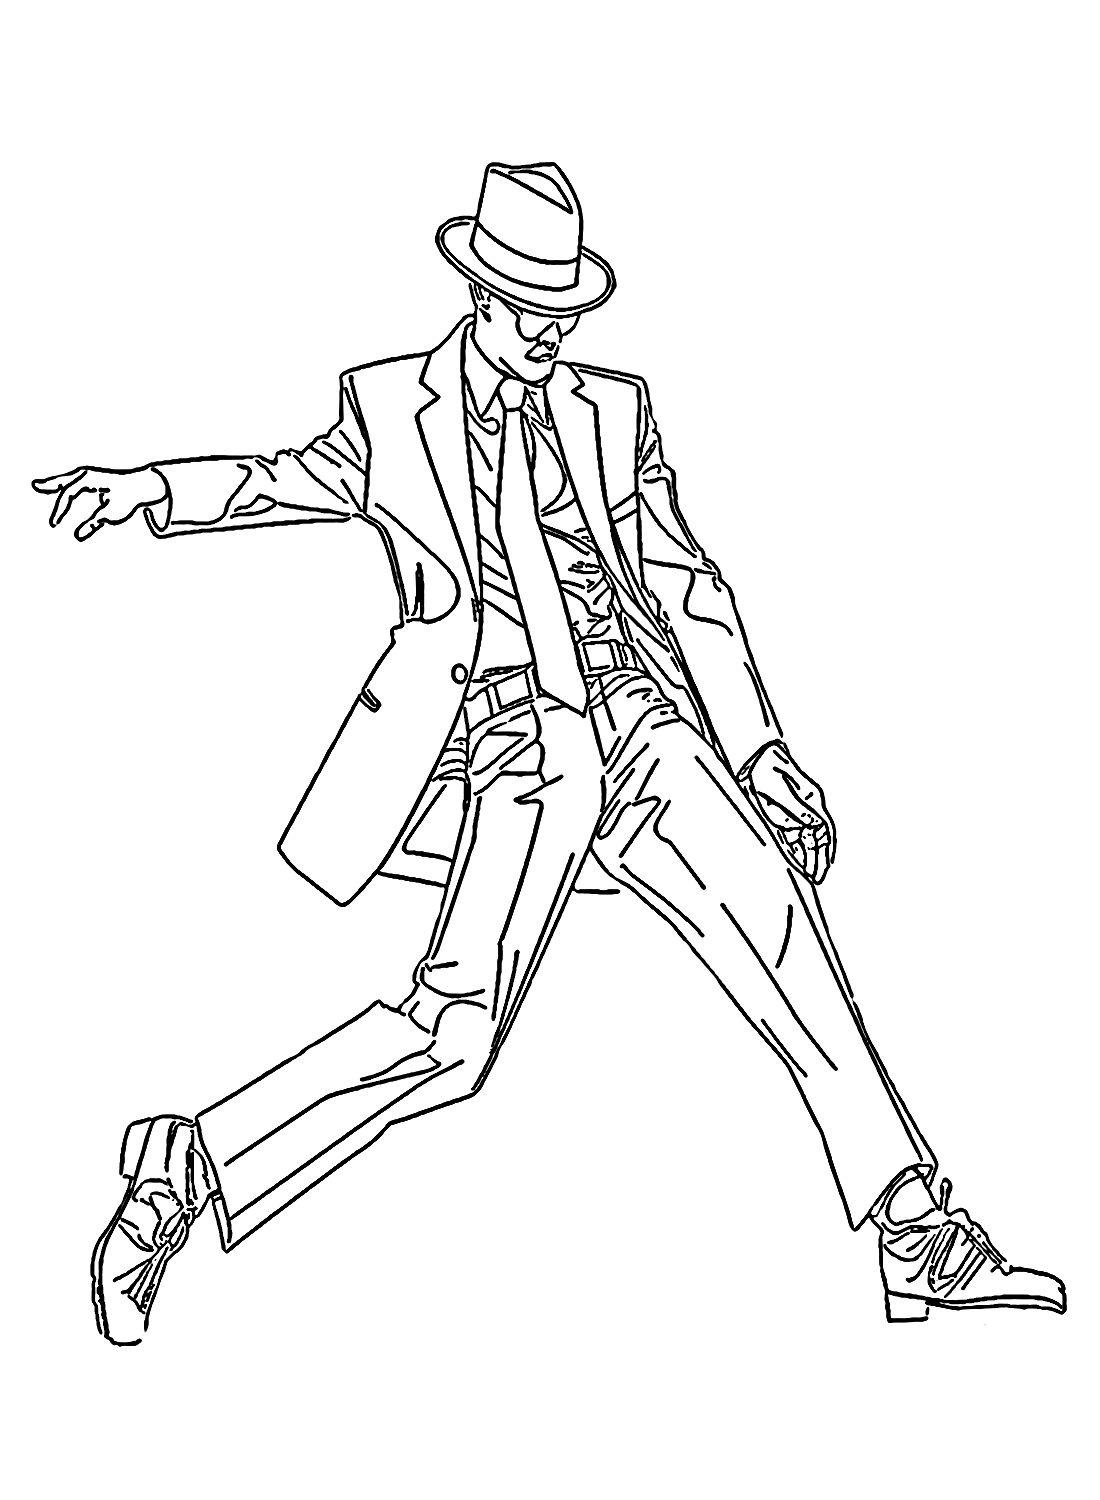 Michael Jackson with Gravity-defying Leaning Coloring Page